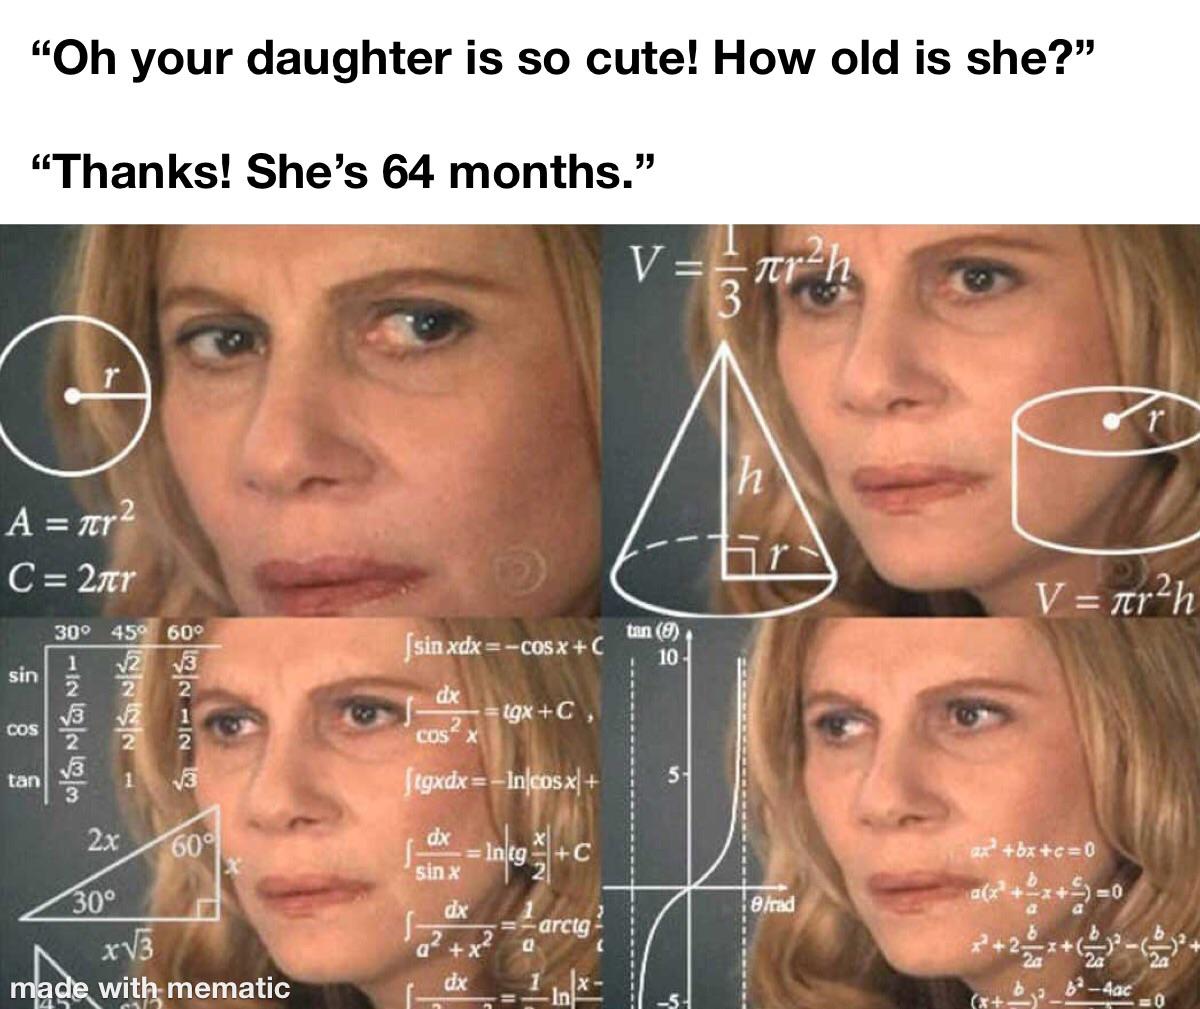 jason collier memes - "Oh your daughter is so cute! How old is she? Thanks! She's 64 months. VTr 3 r h A nr 2 C 2tr hr V trh 30 45 60 1 23 sin xdxcosx tan 0 10 sin dx tgx C, Cos | Ni En New Cos X tan tgxdx Incosx 5 Scene 2x dx 609 Qbxc0 Infoc sinx 106350 